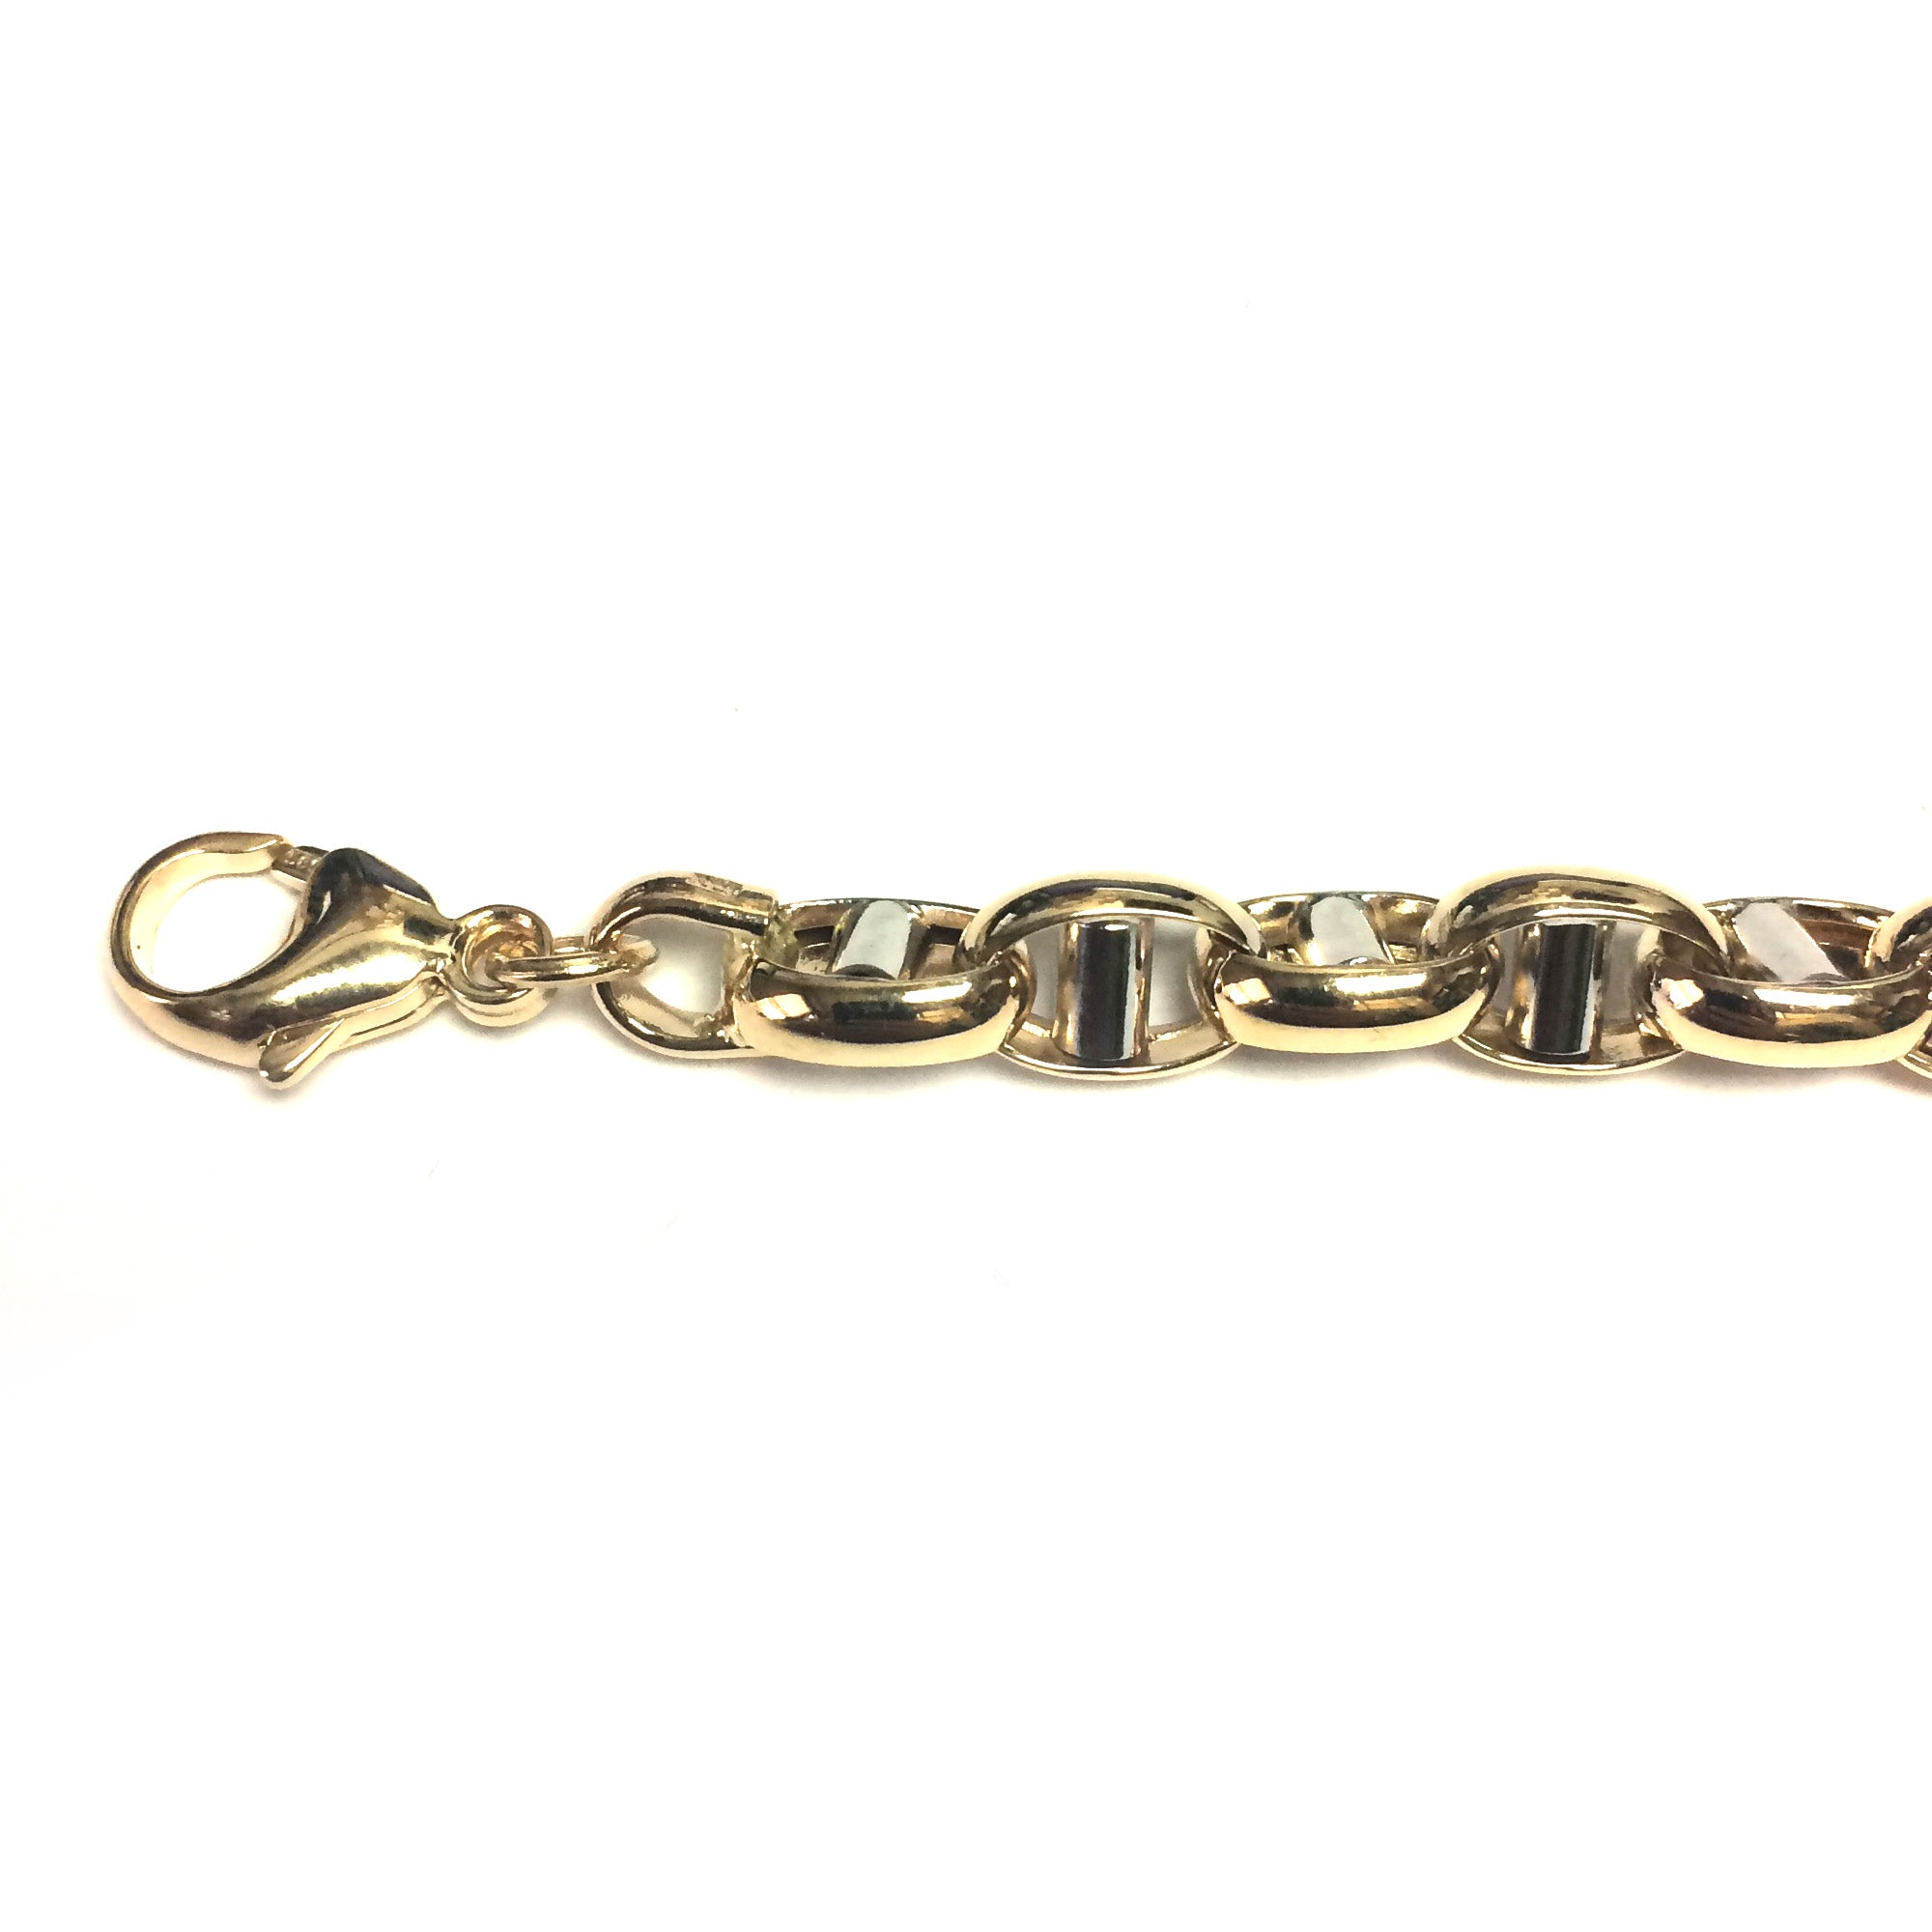 14k Yellow And White Gold Oval Mariner Link Mens Bracelet, 8.5"